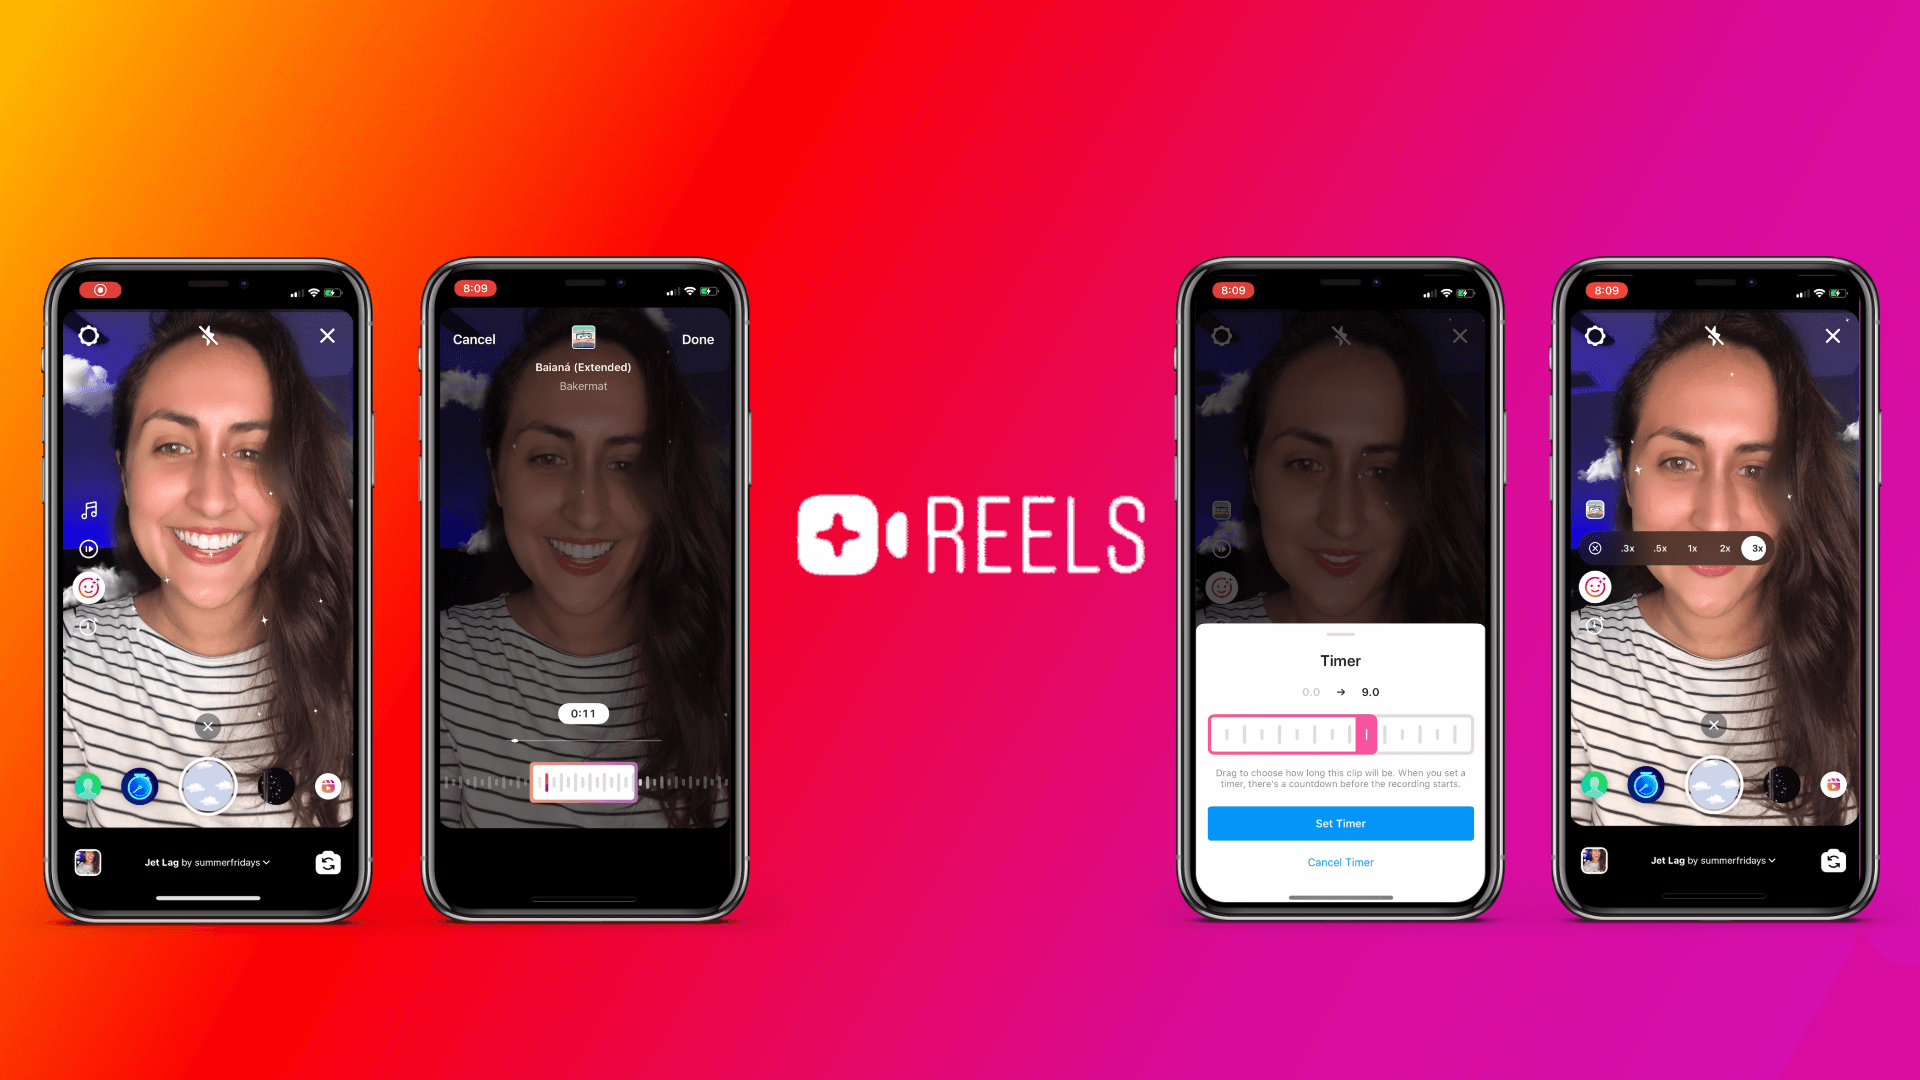 How Do I Complete My Instagram Reel To Go Viral?